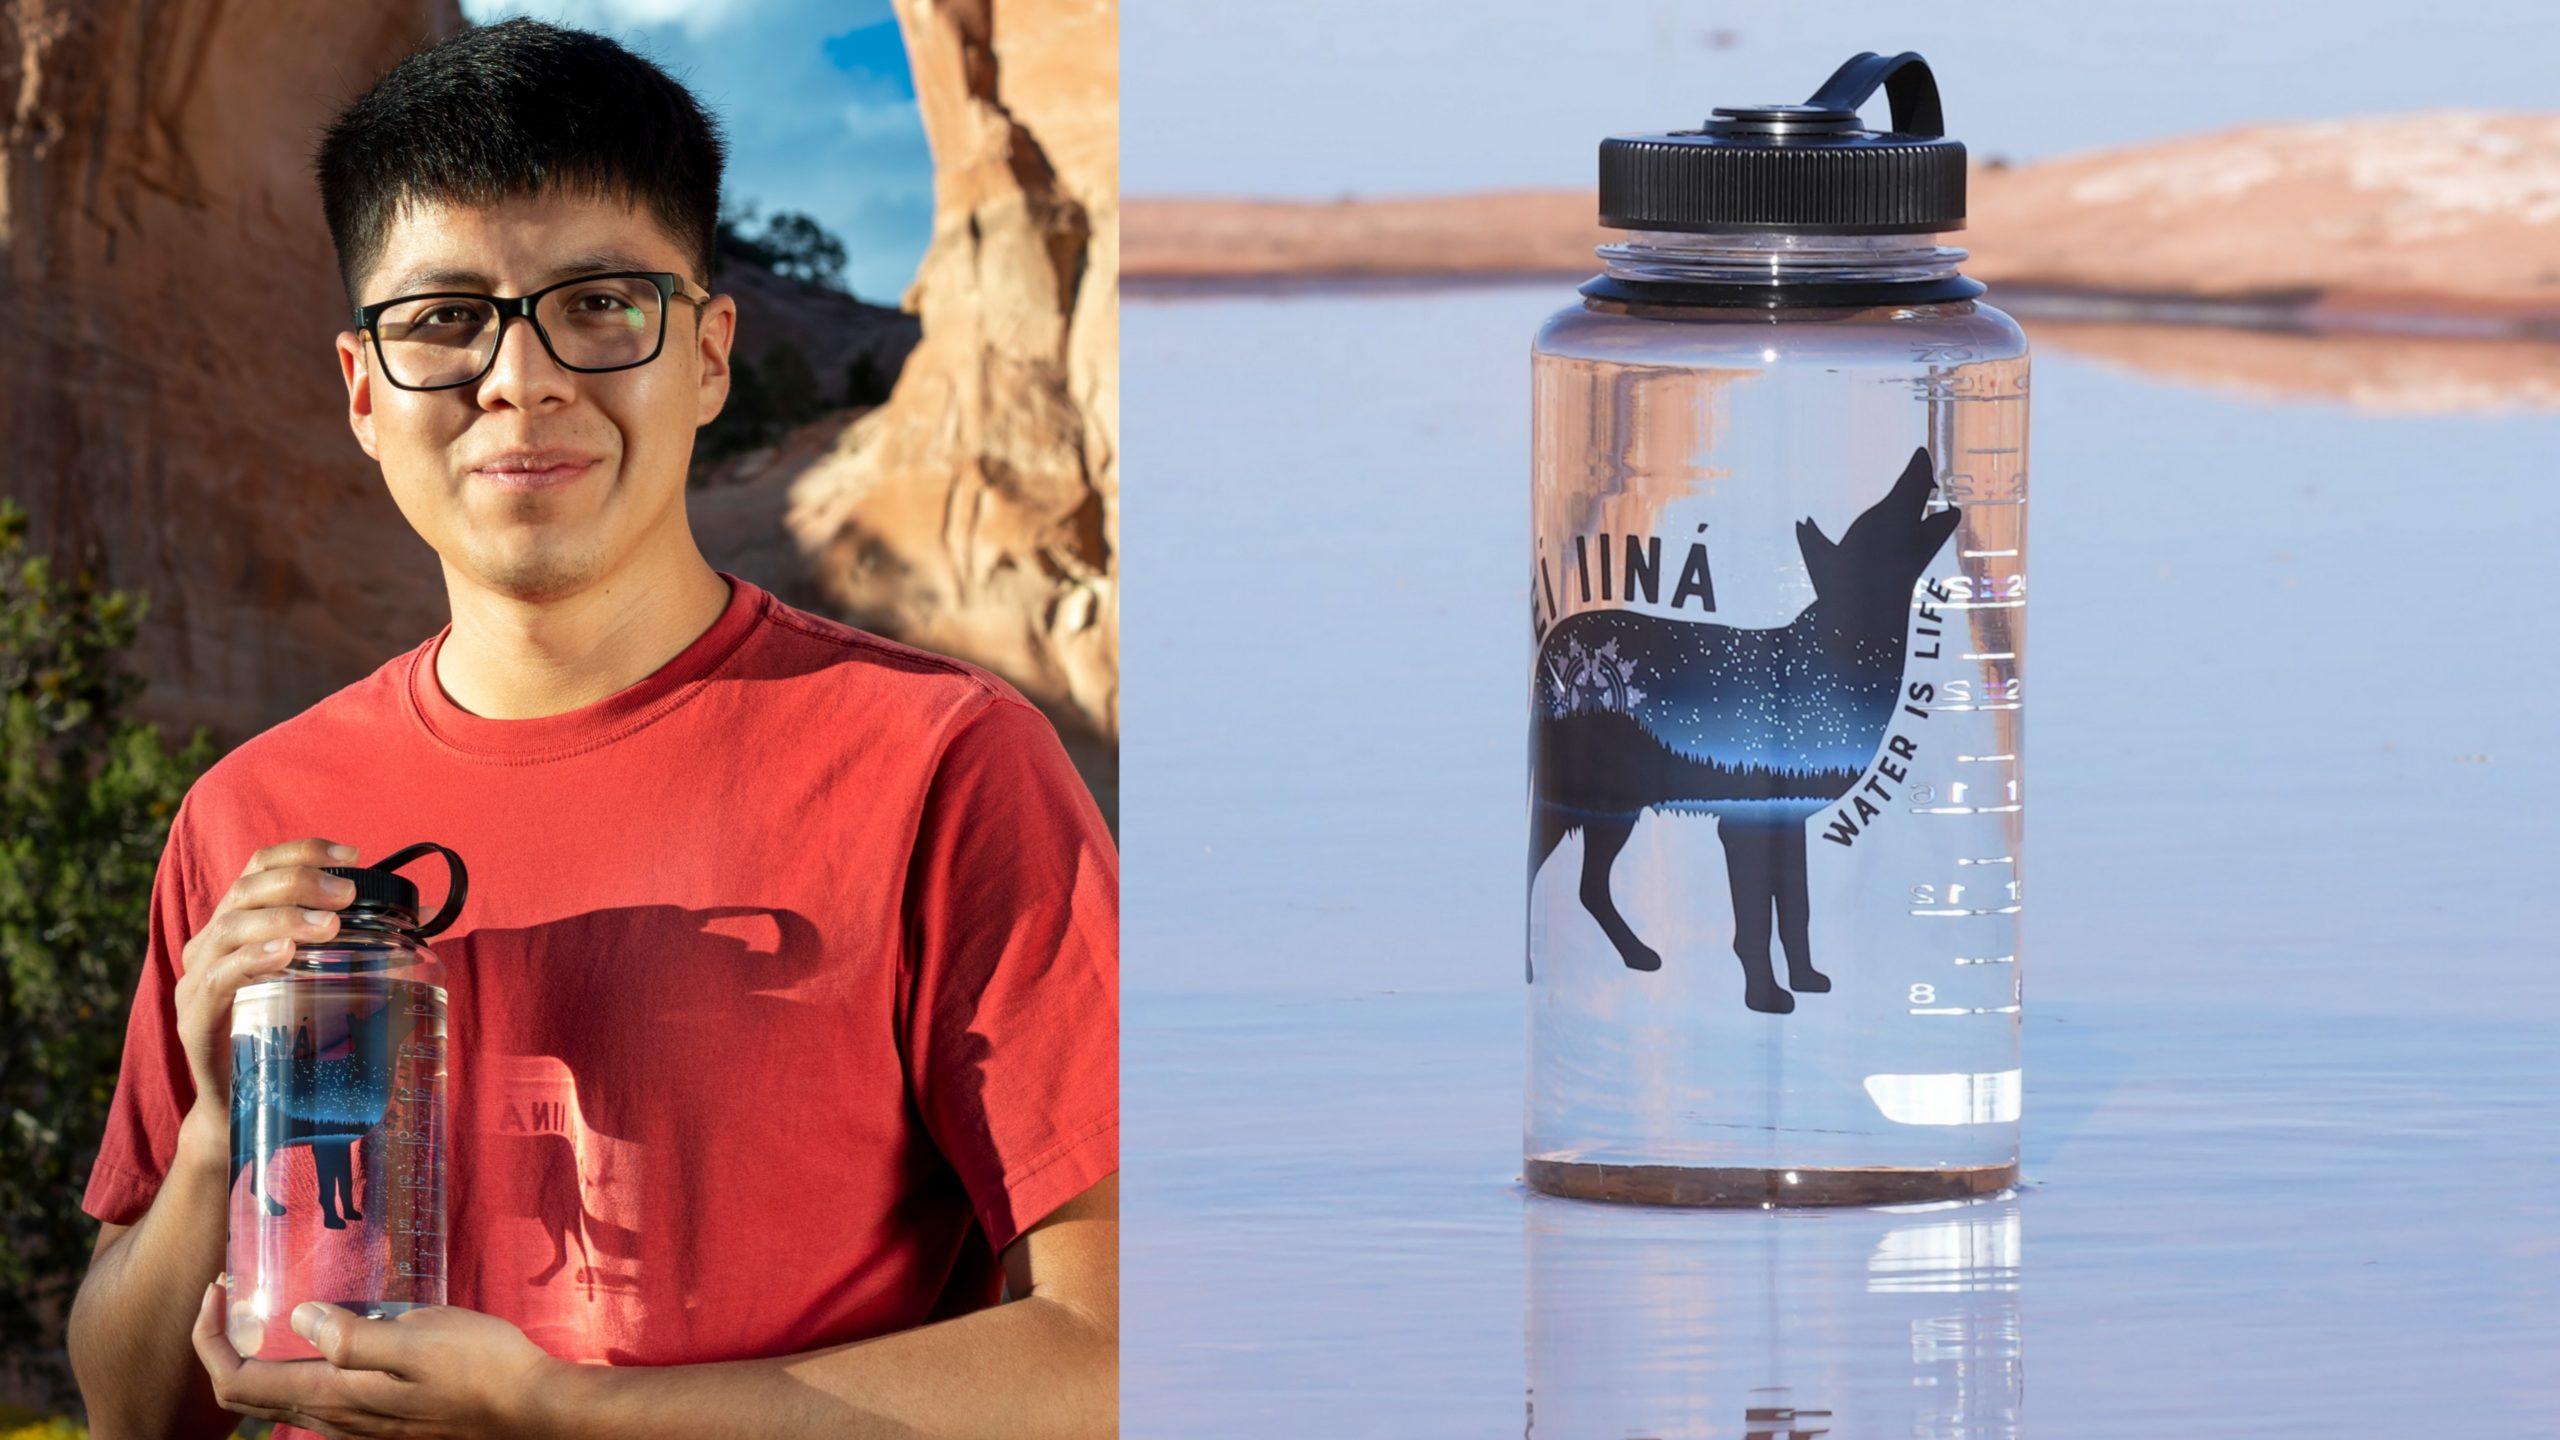 https://nativeviewpoint.com/wp-content/uploads/2022/10/Dine-Designer-Jaden-Redhair-and-his-Water-is-Life-Coyote-bottle-design-scaled.jpg